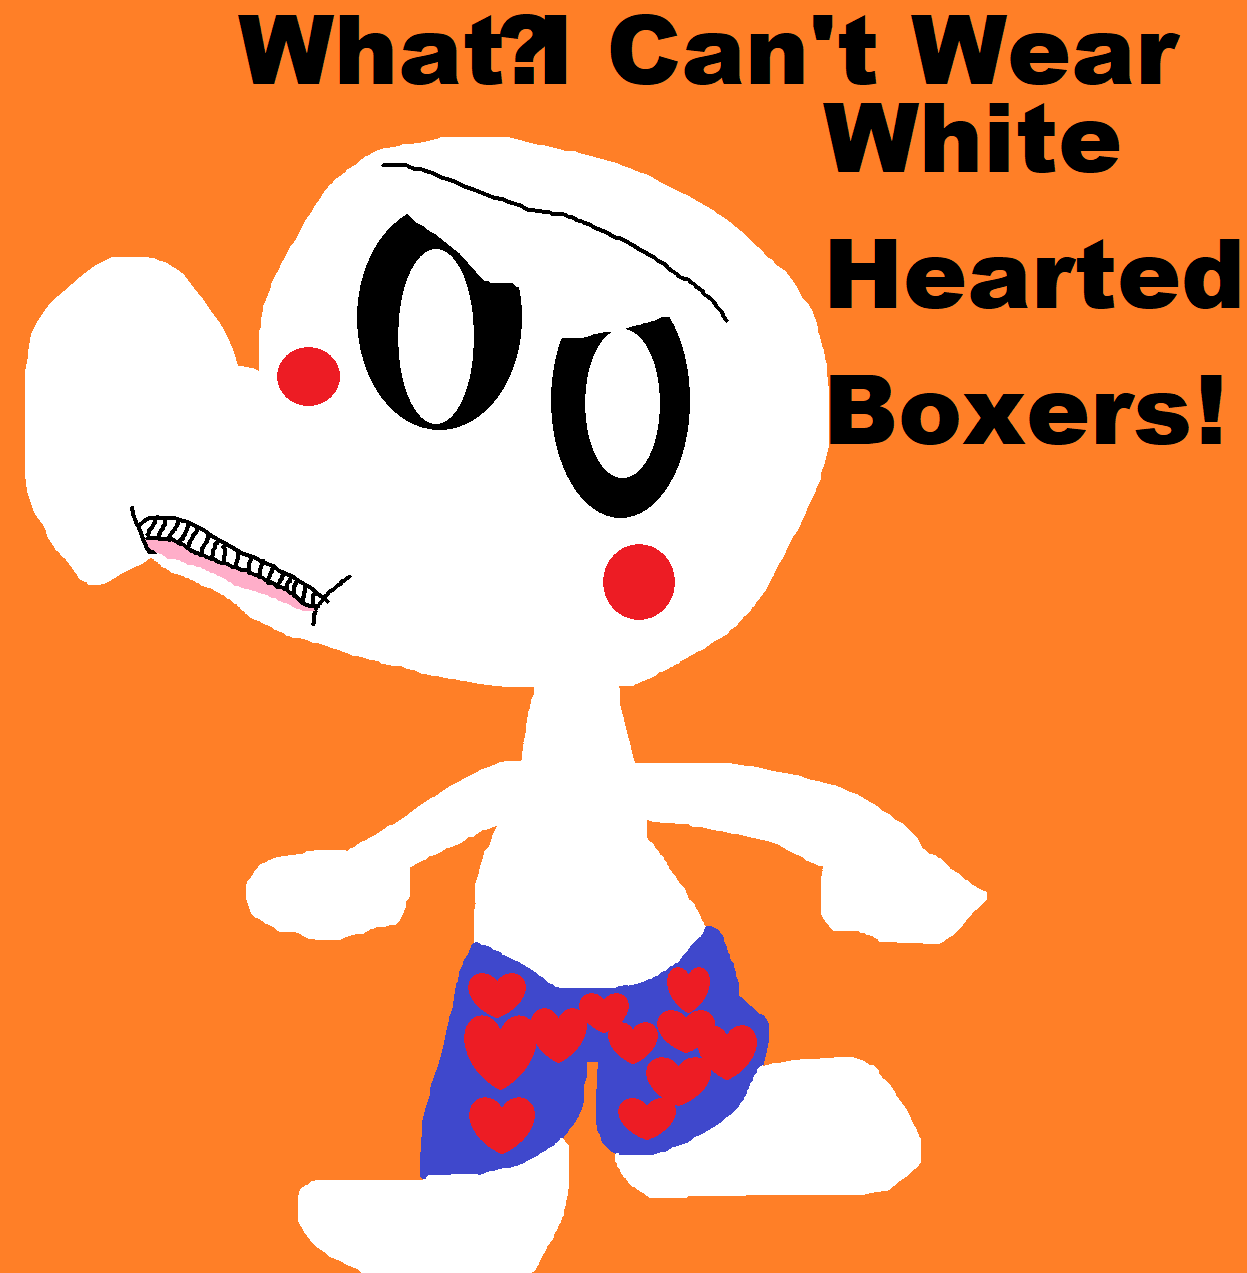 What I Can't Wear White Hearted Boxers by Falconlobo